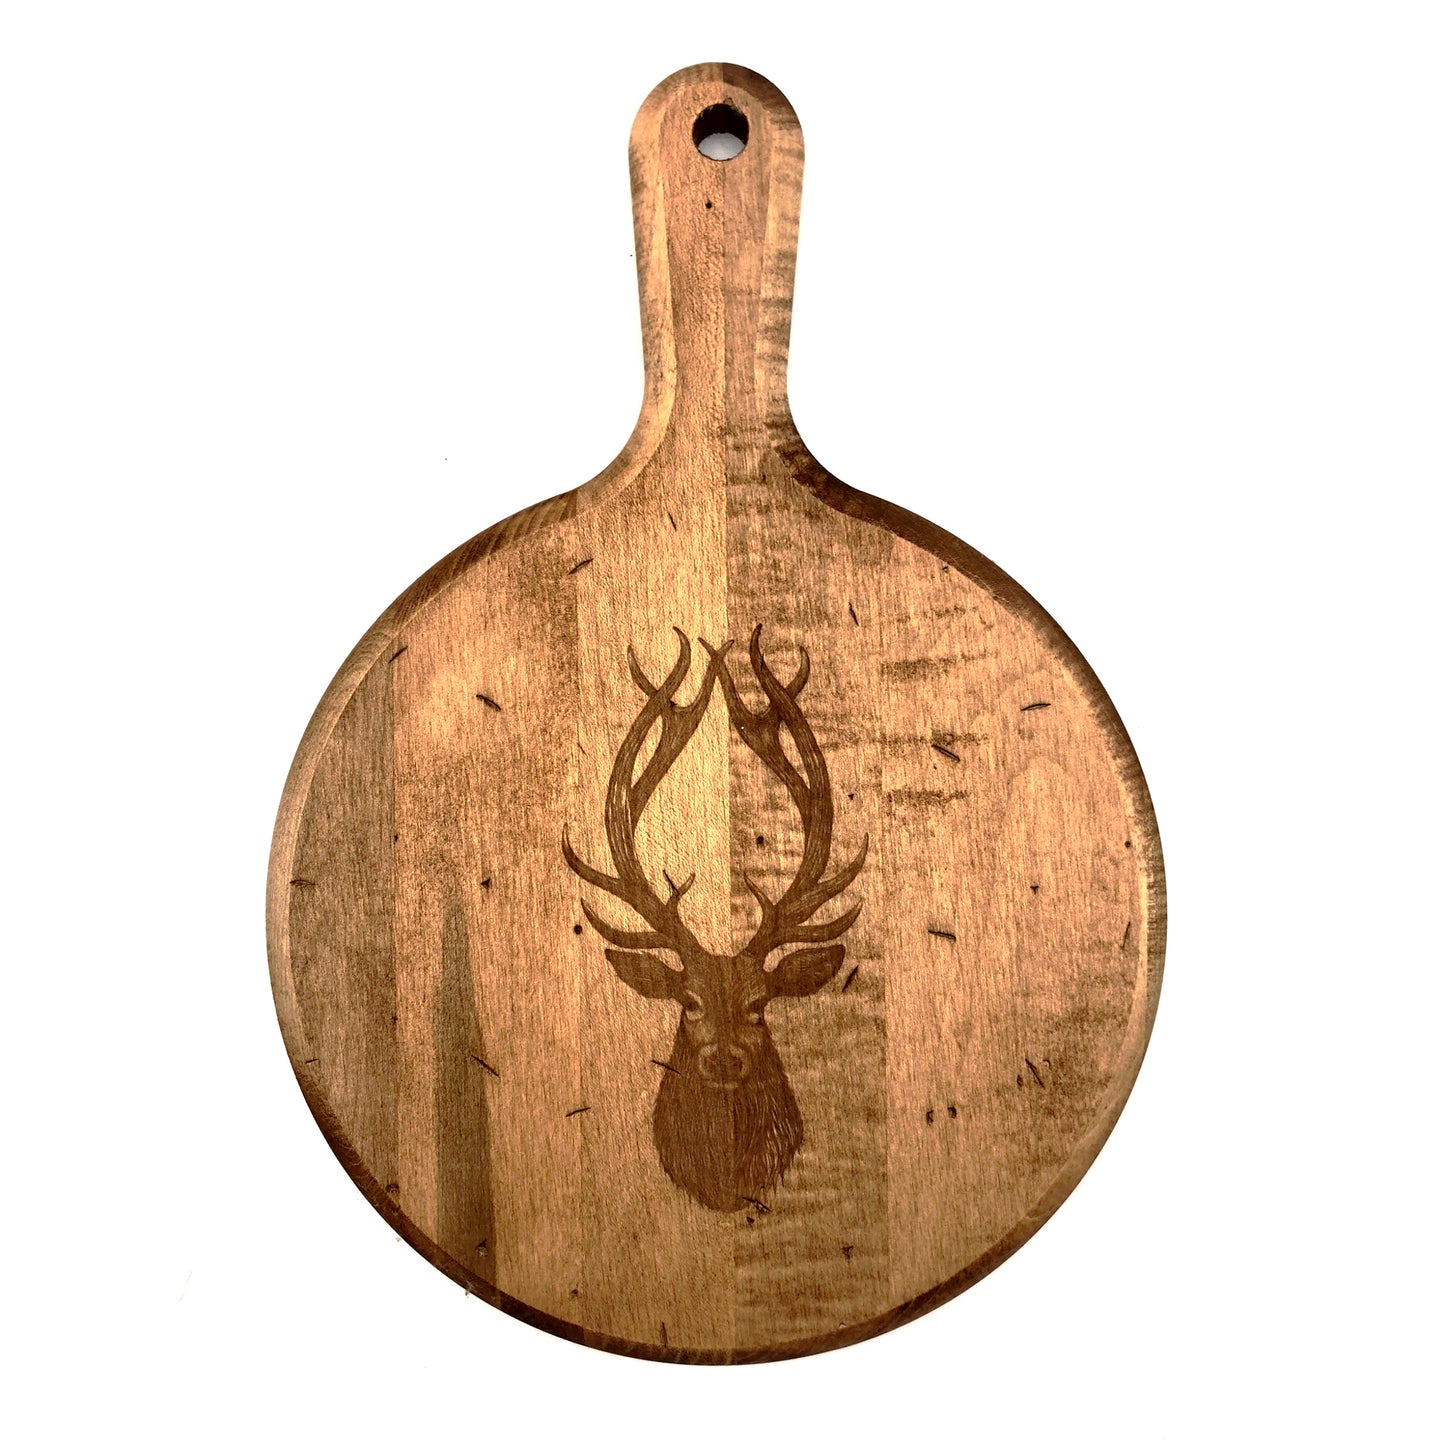 Laura Zindel Maple Artisan Mirror Serving Board - More designs available